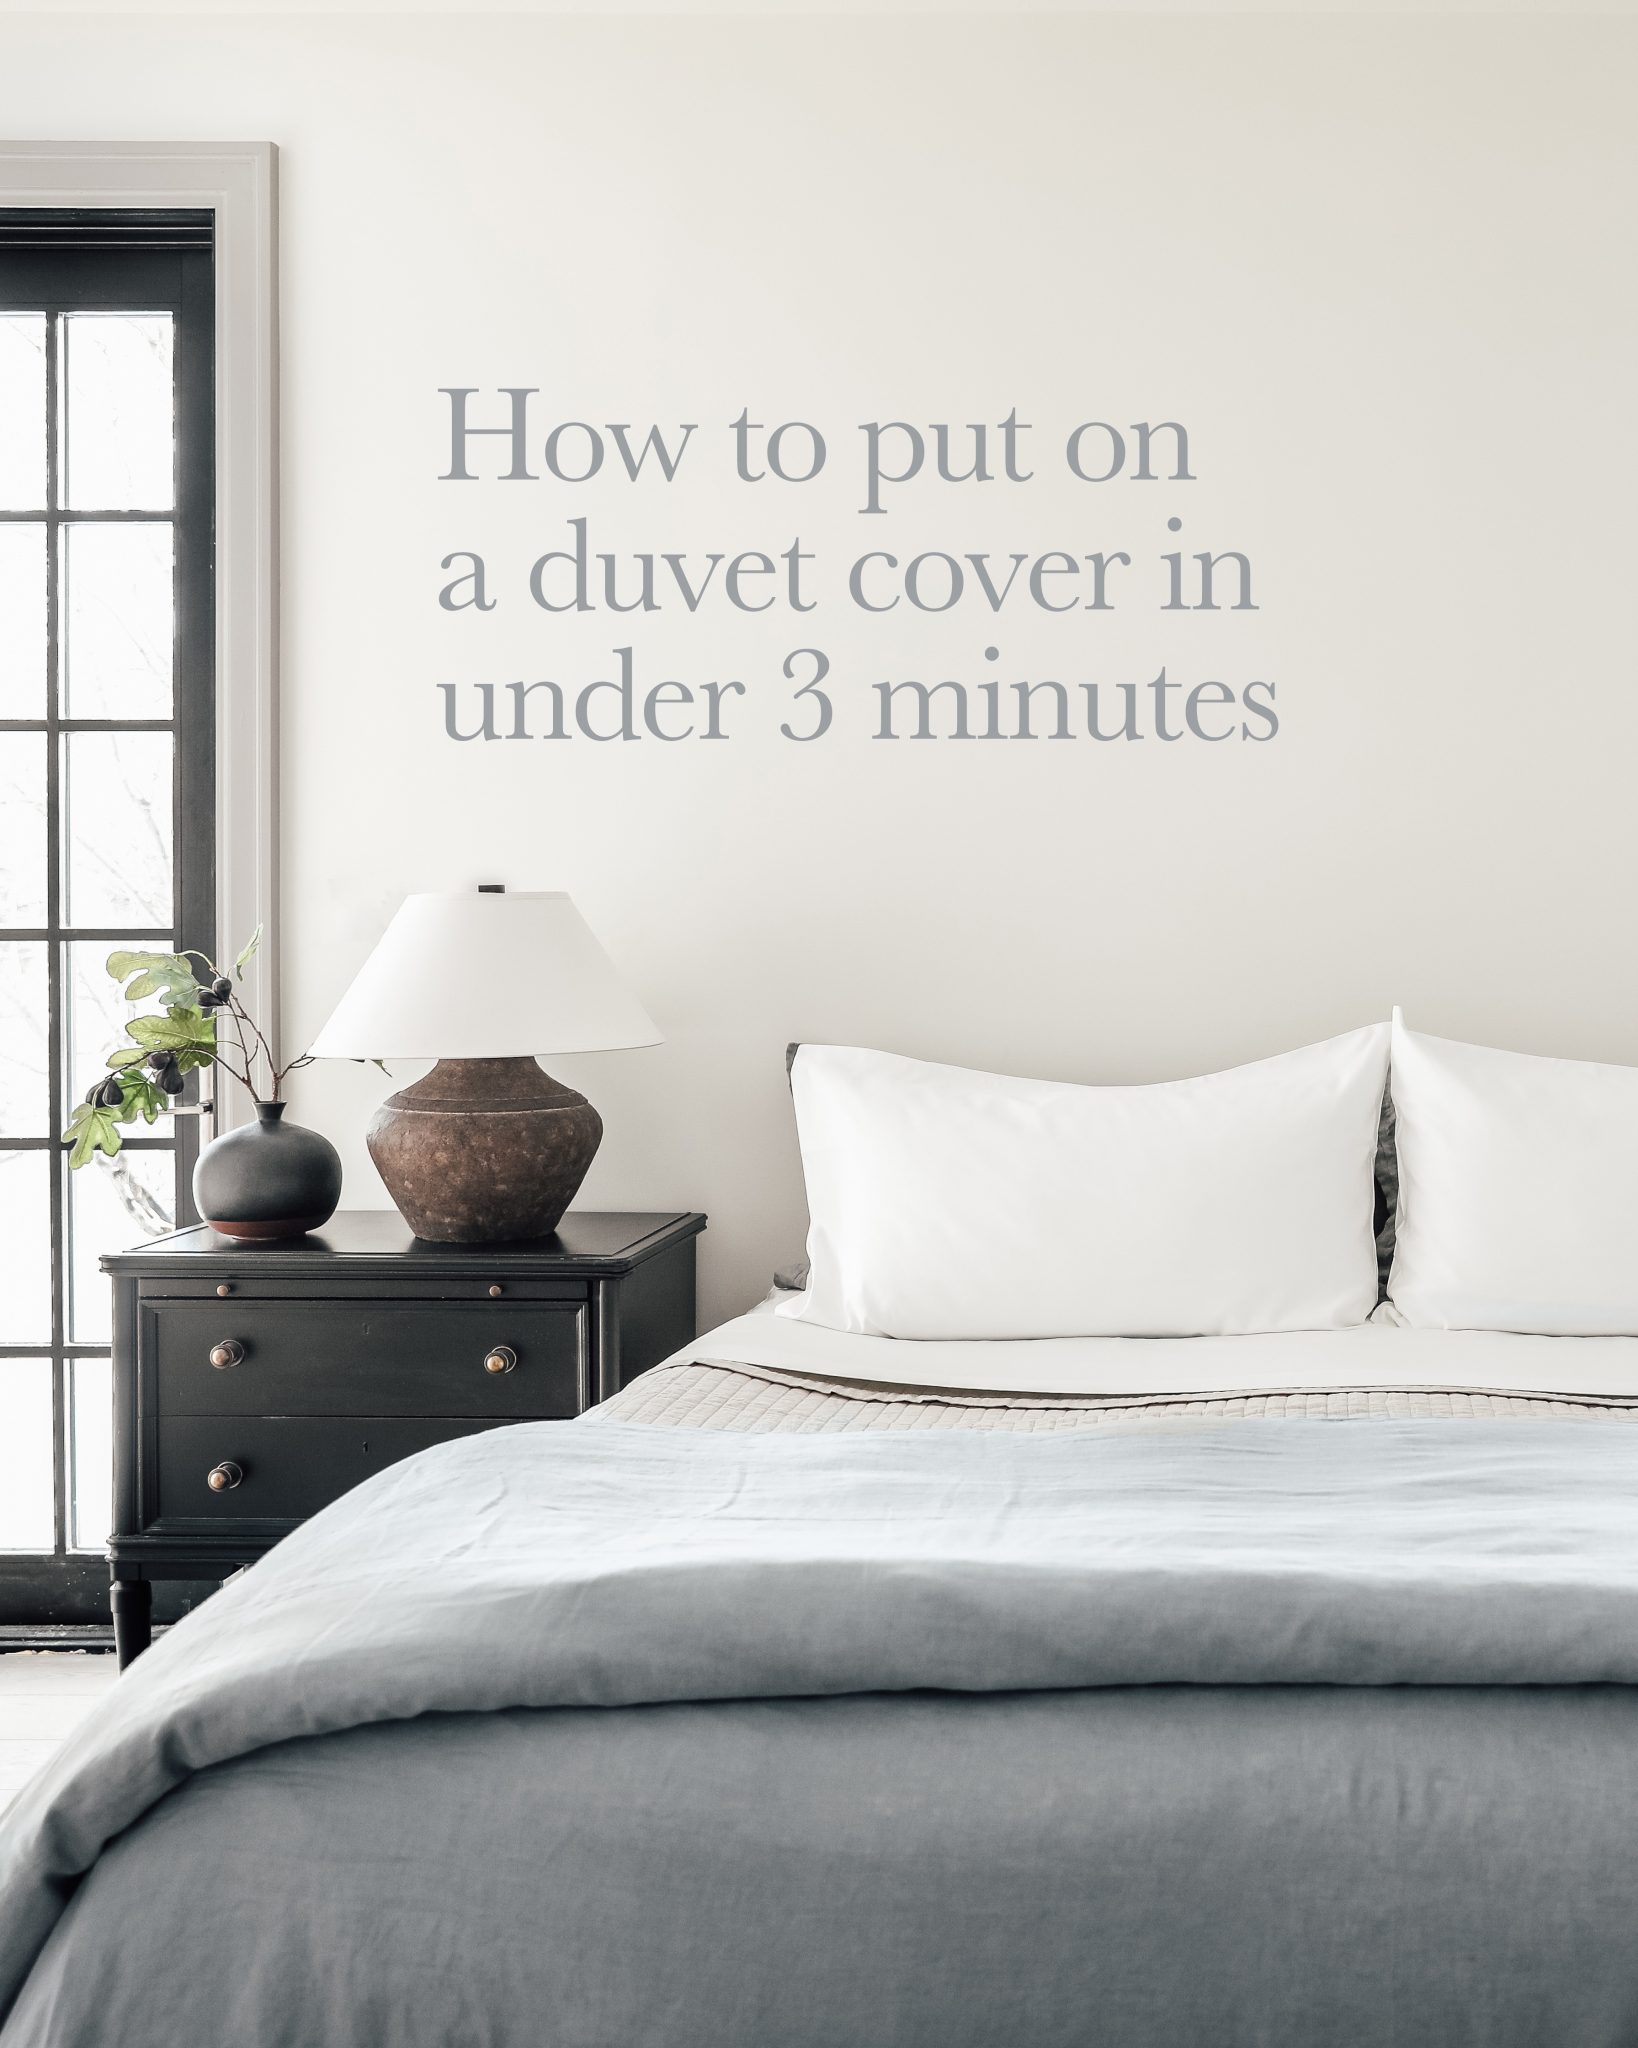 How To Put On A Duvet Cover In Under 3, How Do You Put A Duvet Cover On Yourself